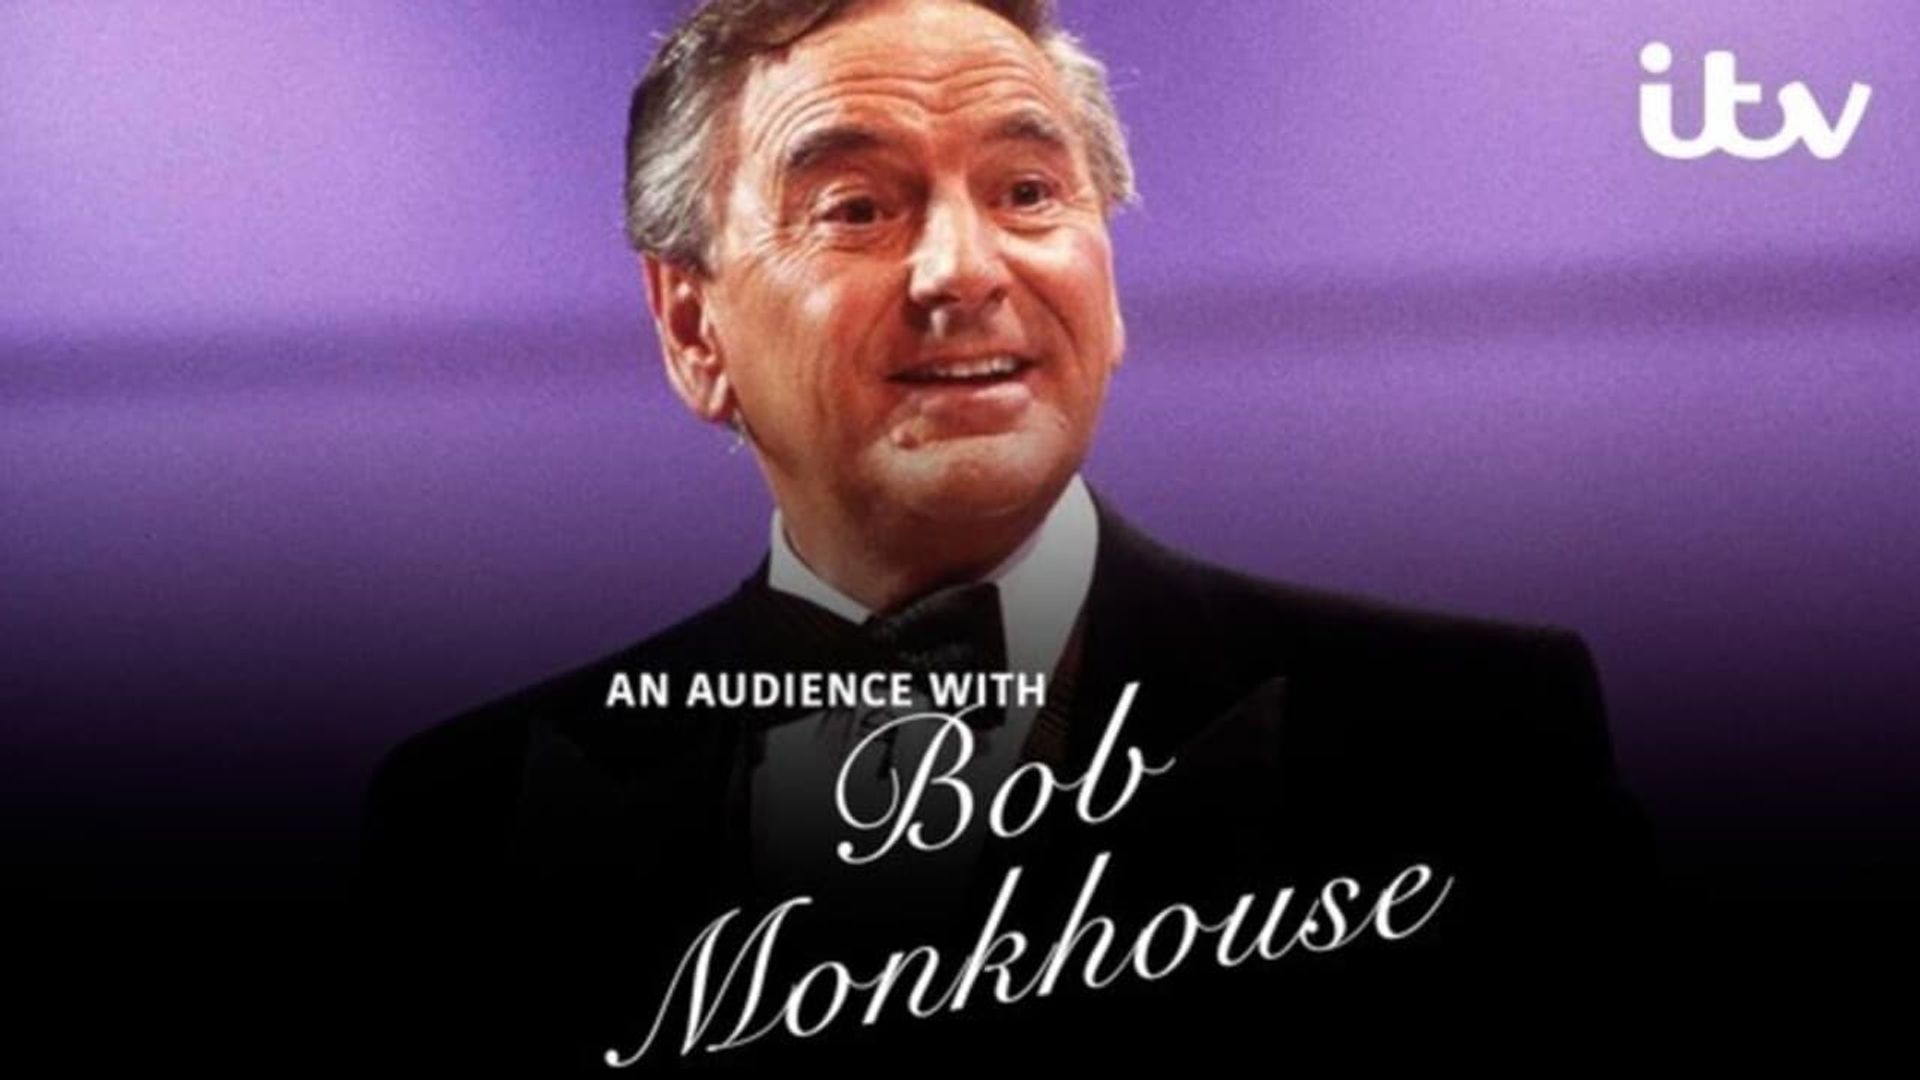 An Audience with Bob Monkhouse background